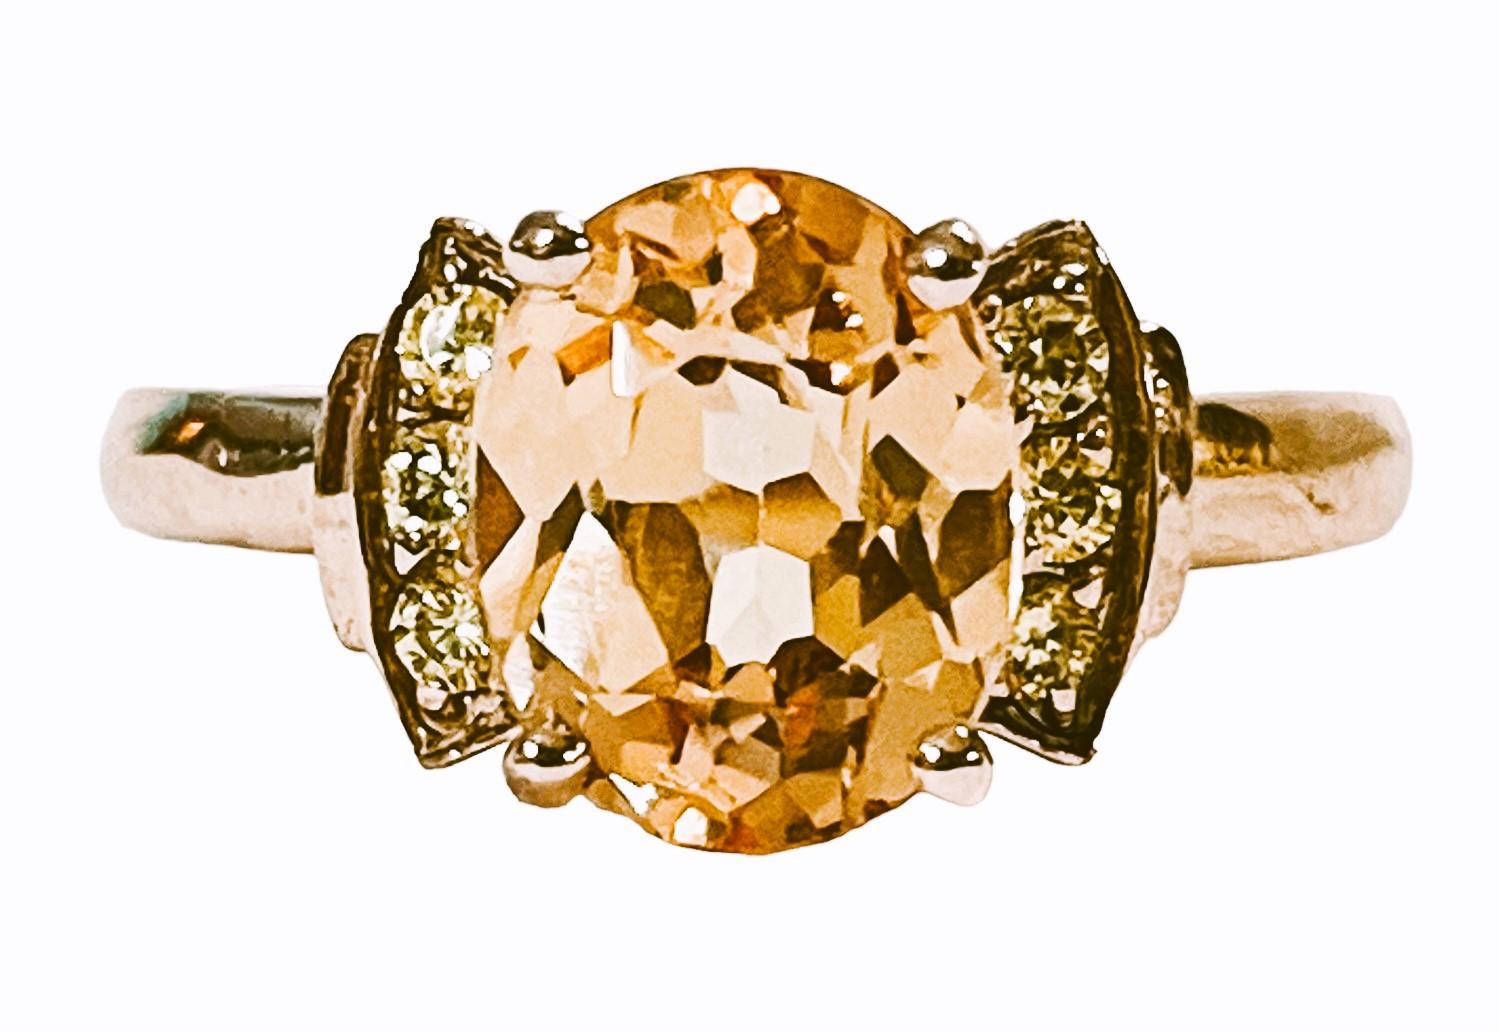 The ring is a size 6.5.   It is a natural stone and was mined in Africa and is just exquisite.  The IF stands for 